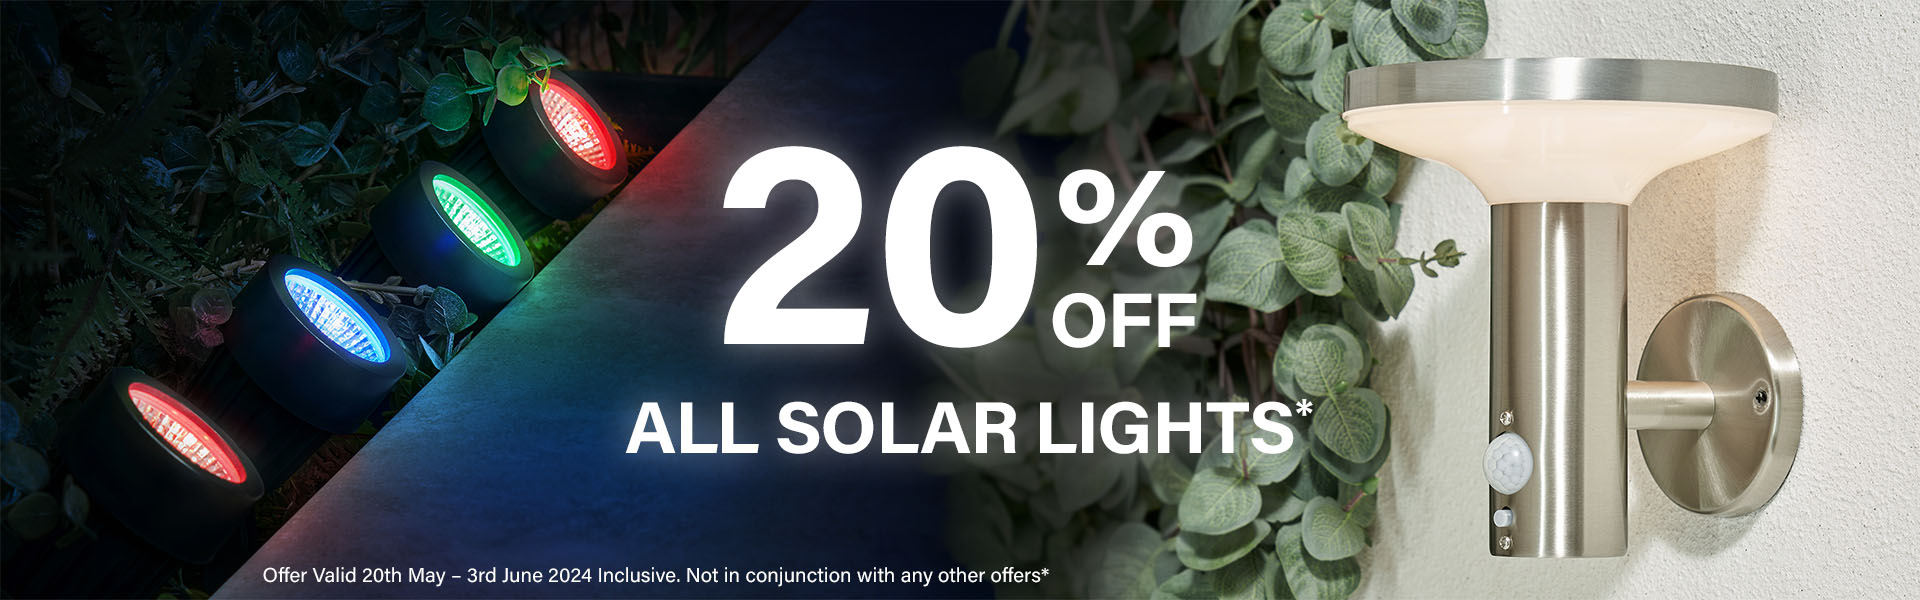 *20% off All Solar Lights. Valid 20th May to 3rd June 2024. Excludes exitisting offers